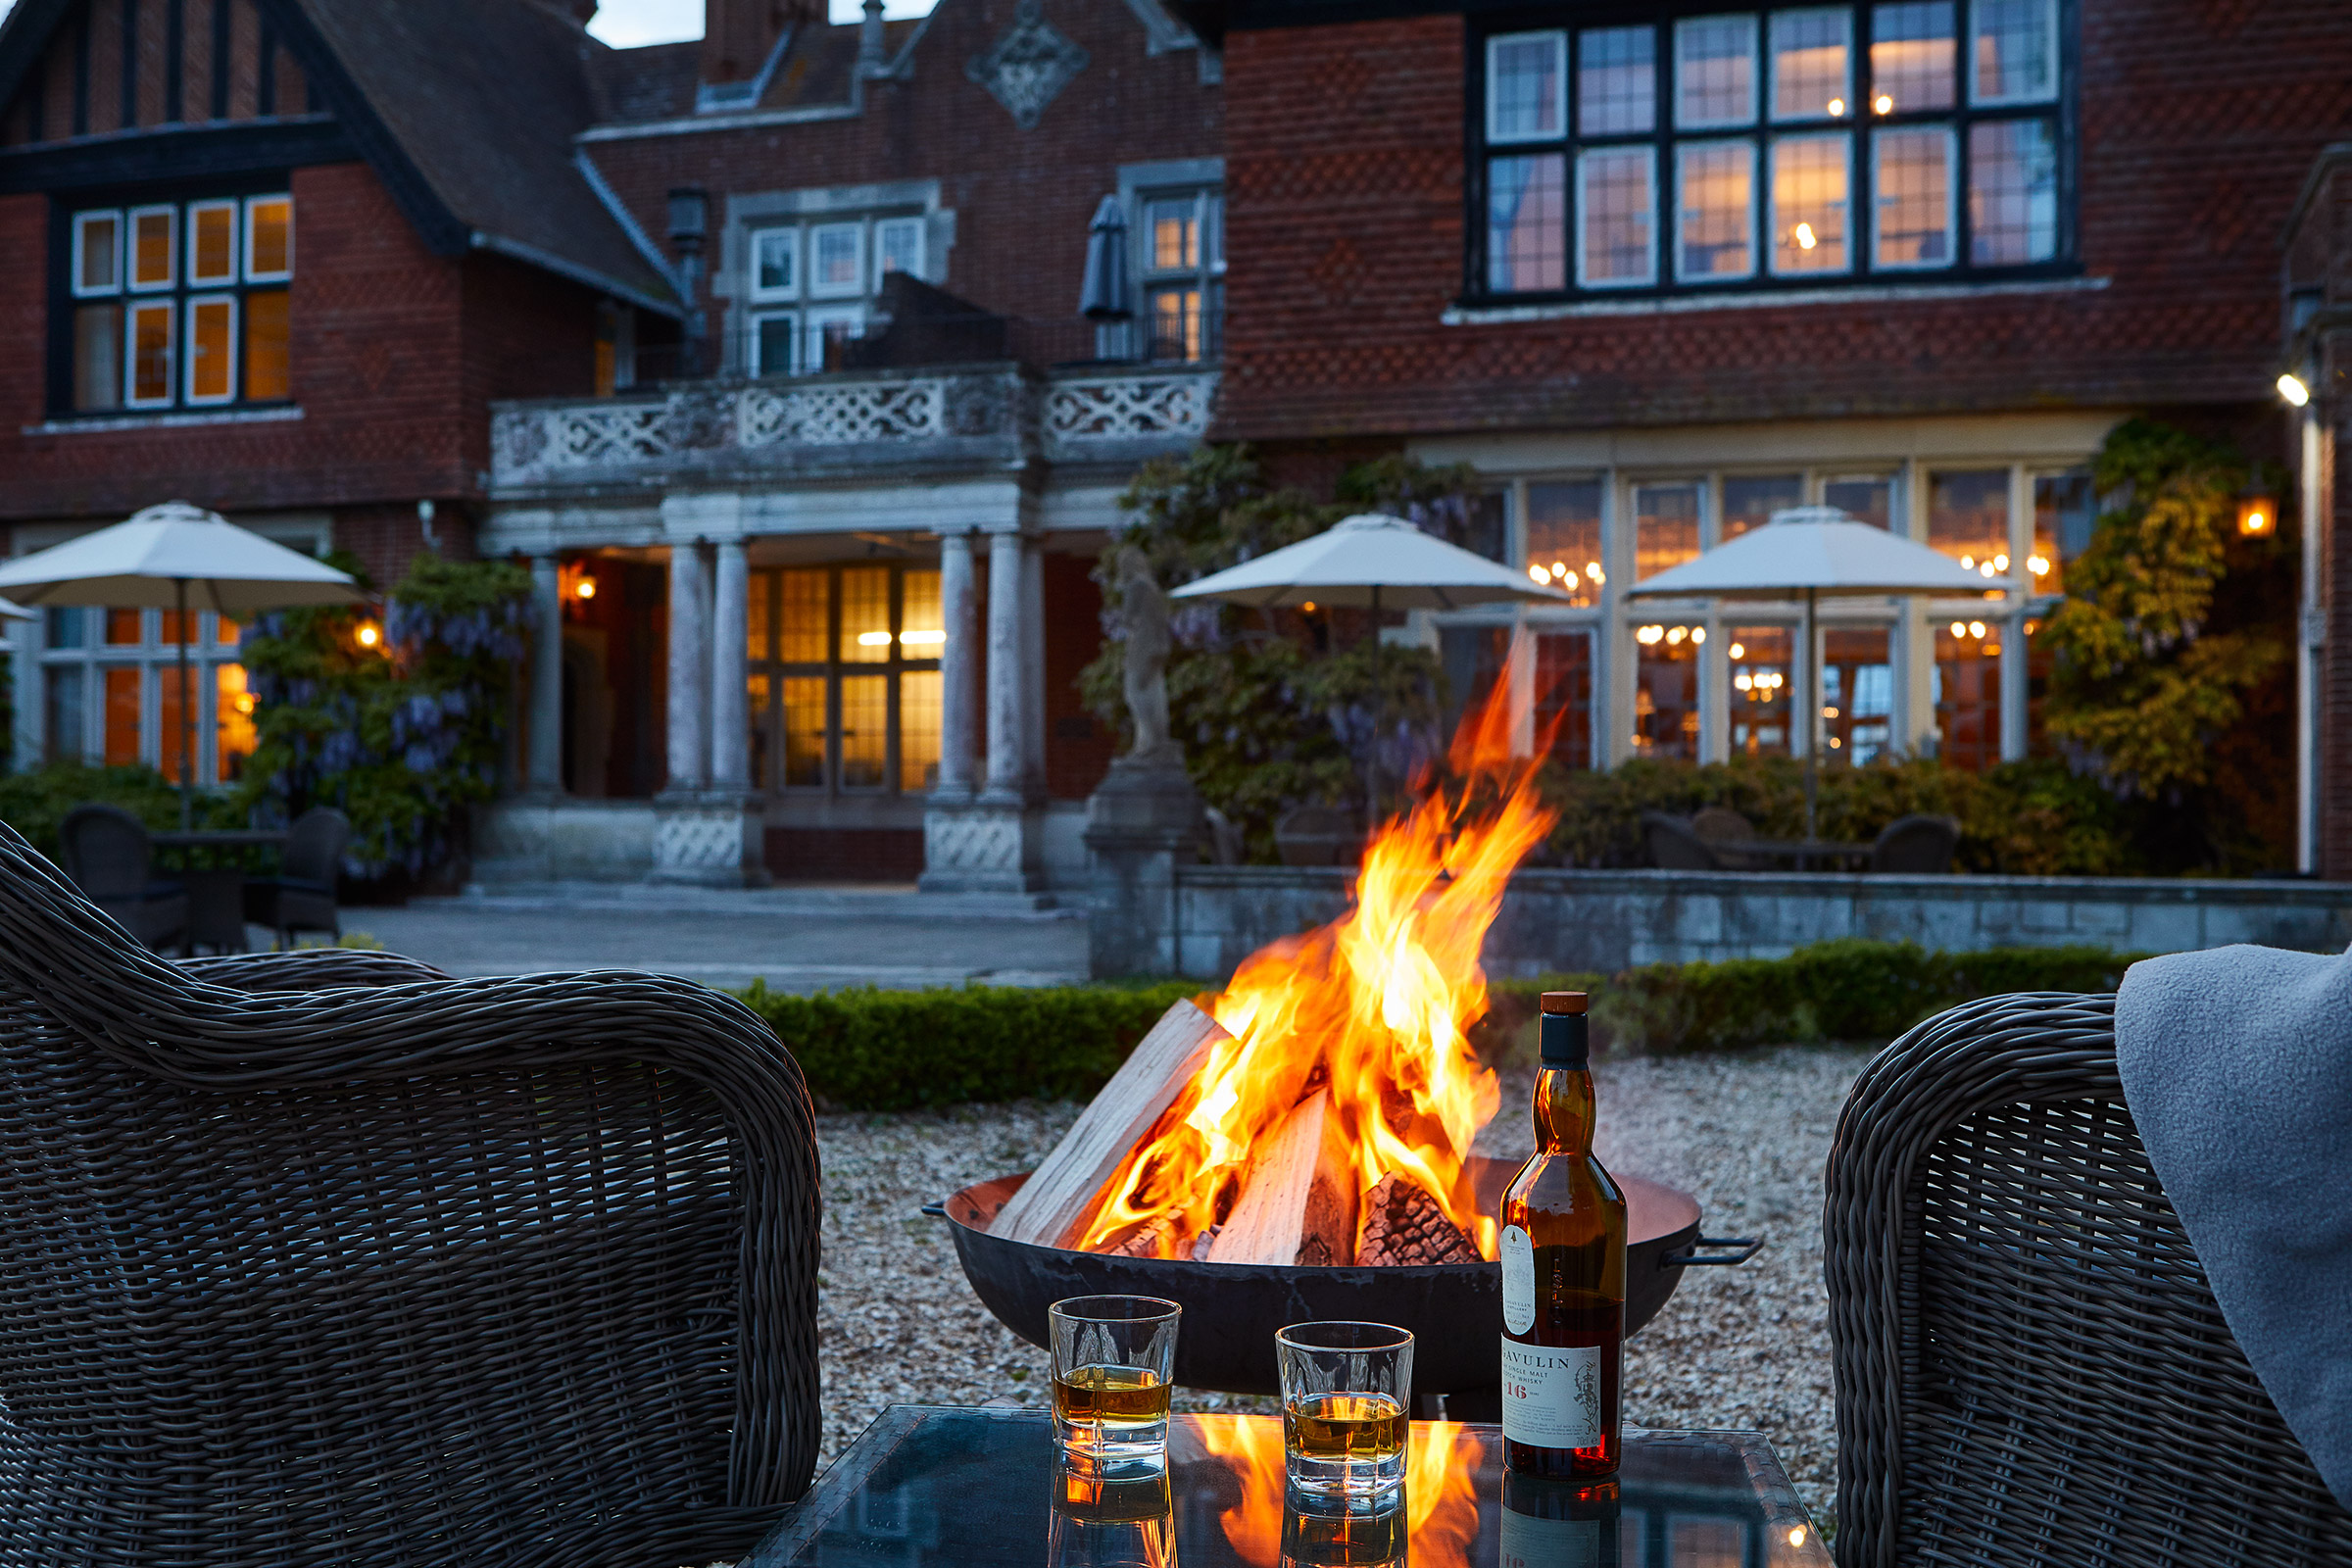 Elmers Court Firepit Whiskies, Travel and lifestyle photographer, Alastair Ferrier.